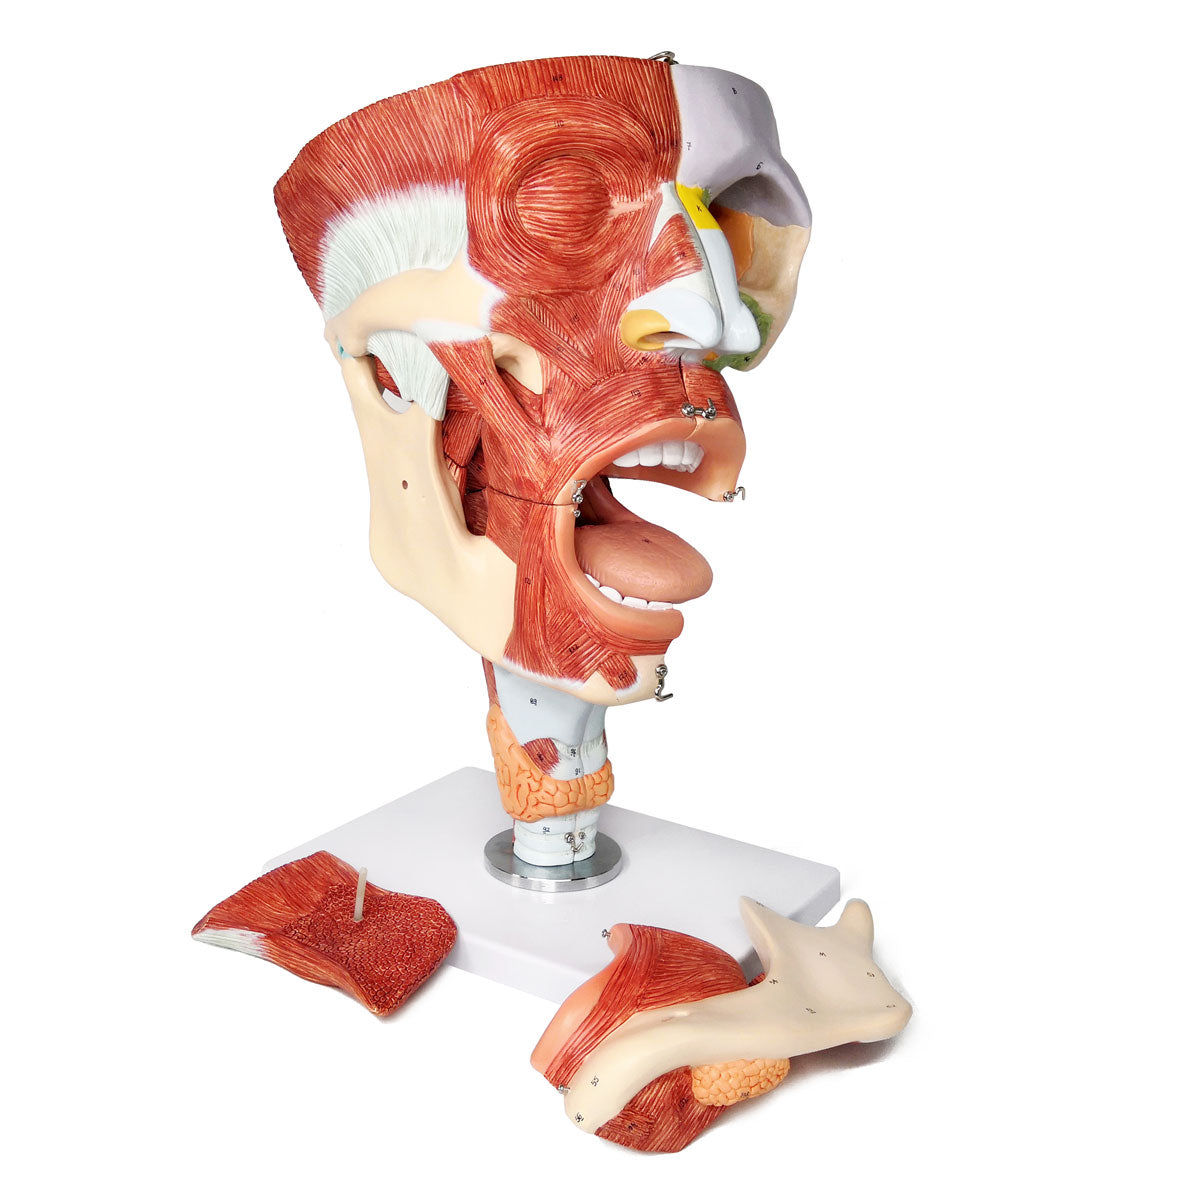 Evotech Scientific Deluxe Cavities of the Nose, Mouth and Throat with Larynx, 2x Life Size, 10 Parts